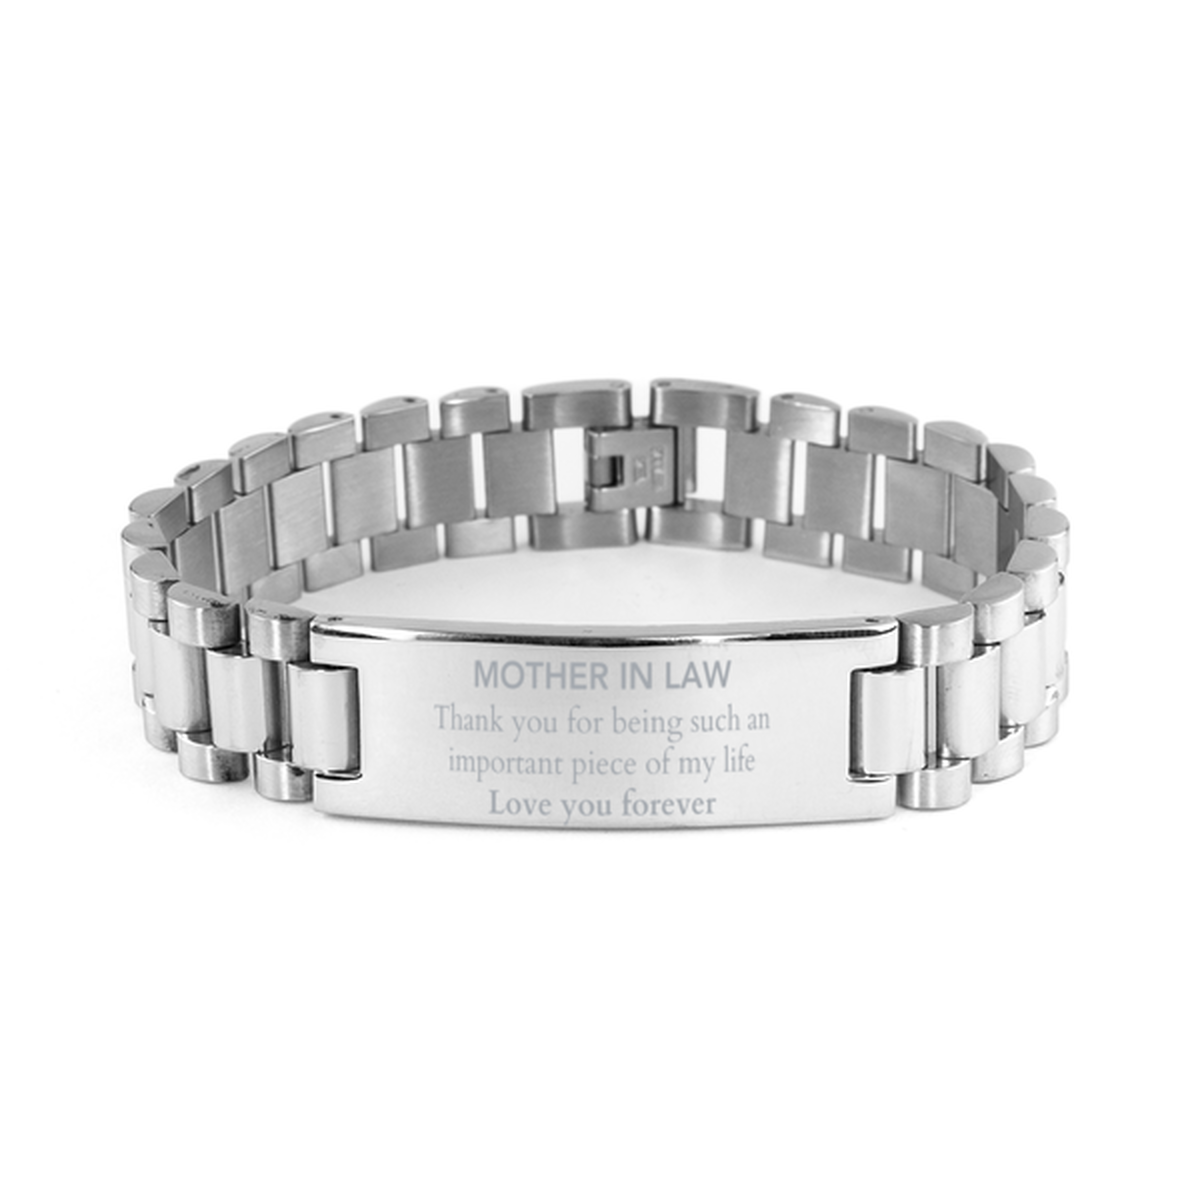 Appropriate Mother In Law Ladder Stainless Steel Bracelet Epic Birthday Gifts for Mother In Law Thank you for being such an important piece of my life Mother In Law Christmas Mothers Fathers Day